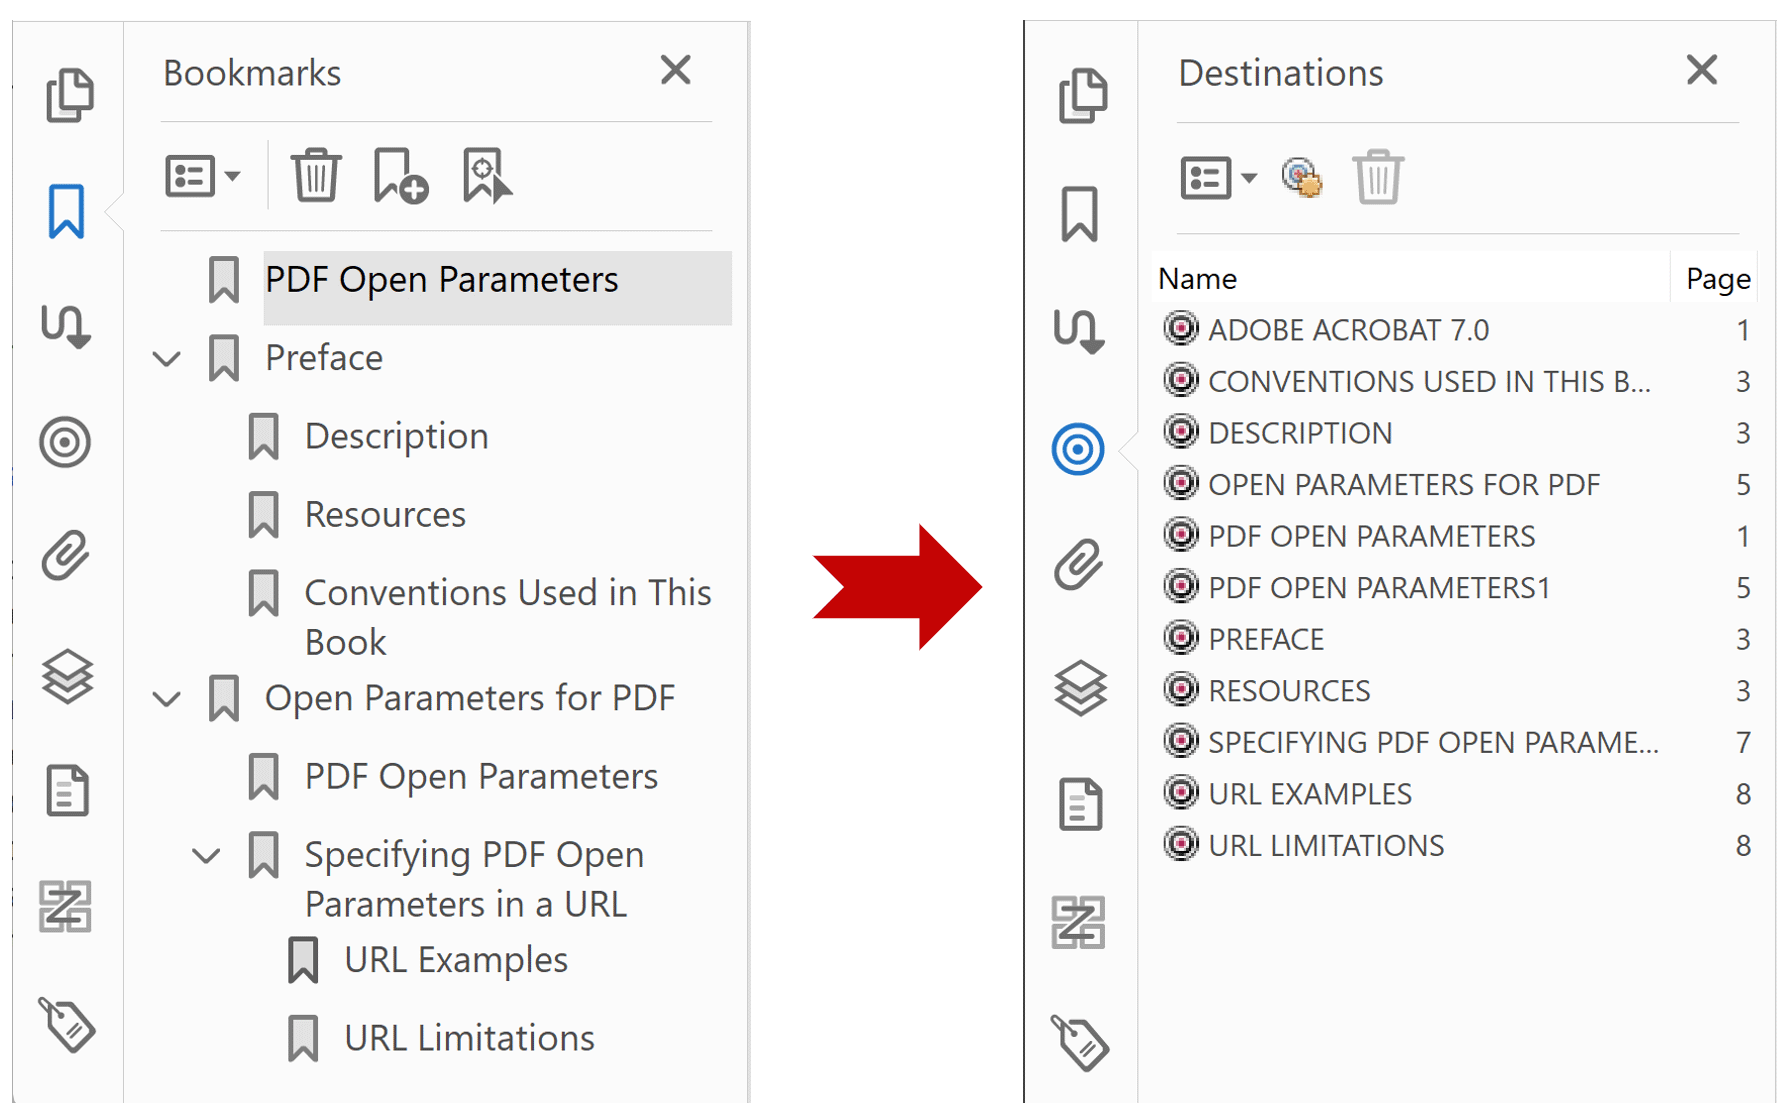 Create PDF destinations from bookmarks